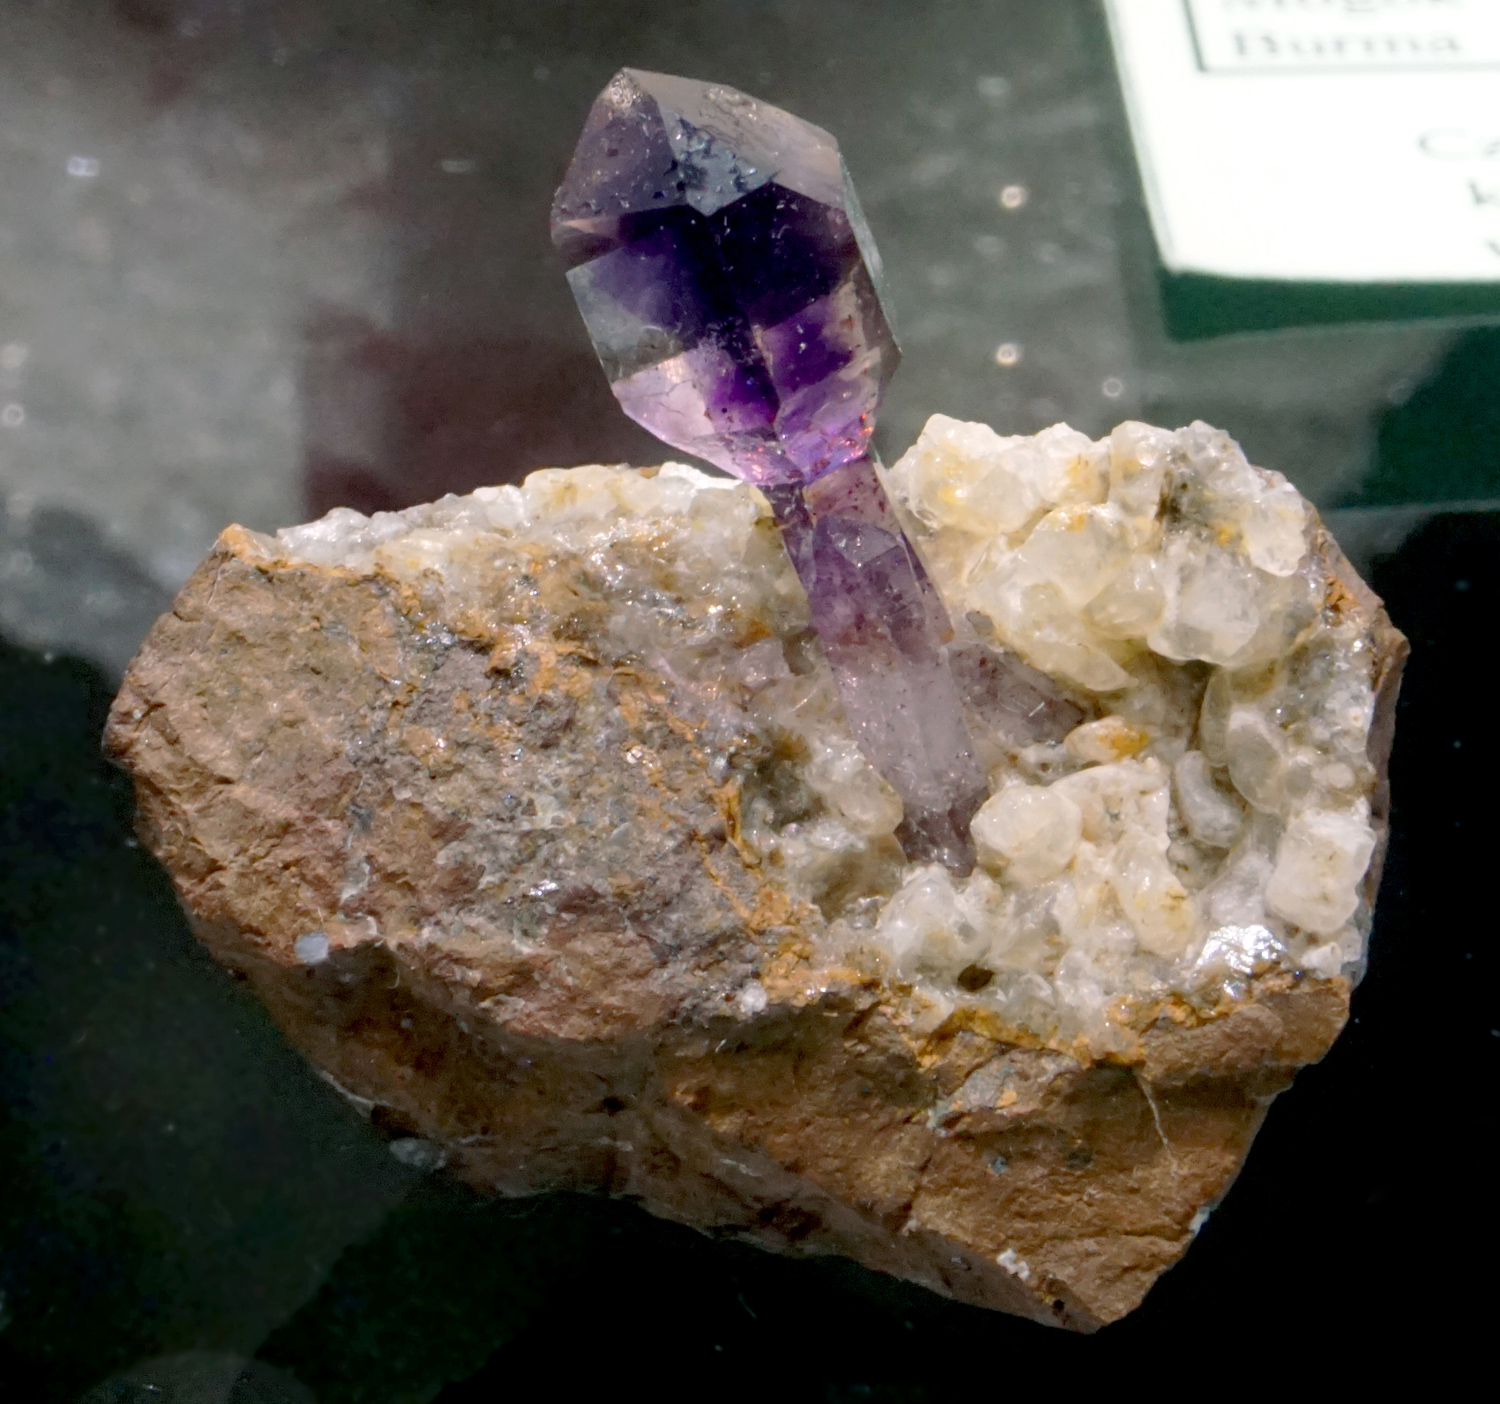 Amethyst Scepter Crystal from Goboboseb Mountains, Namibia